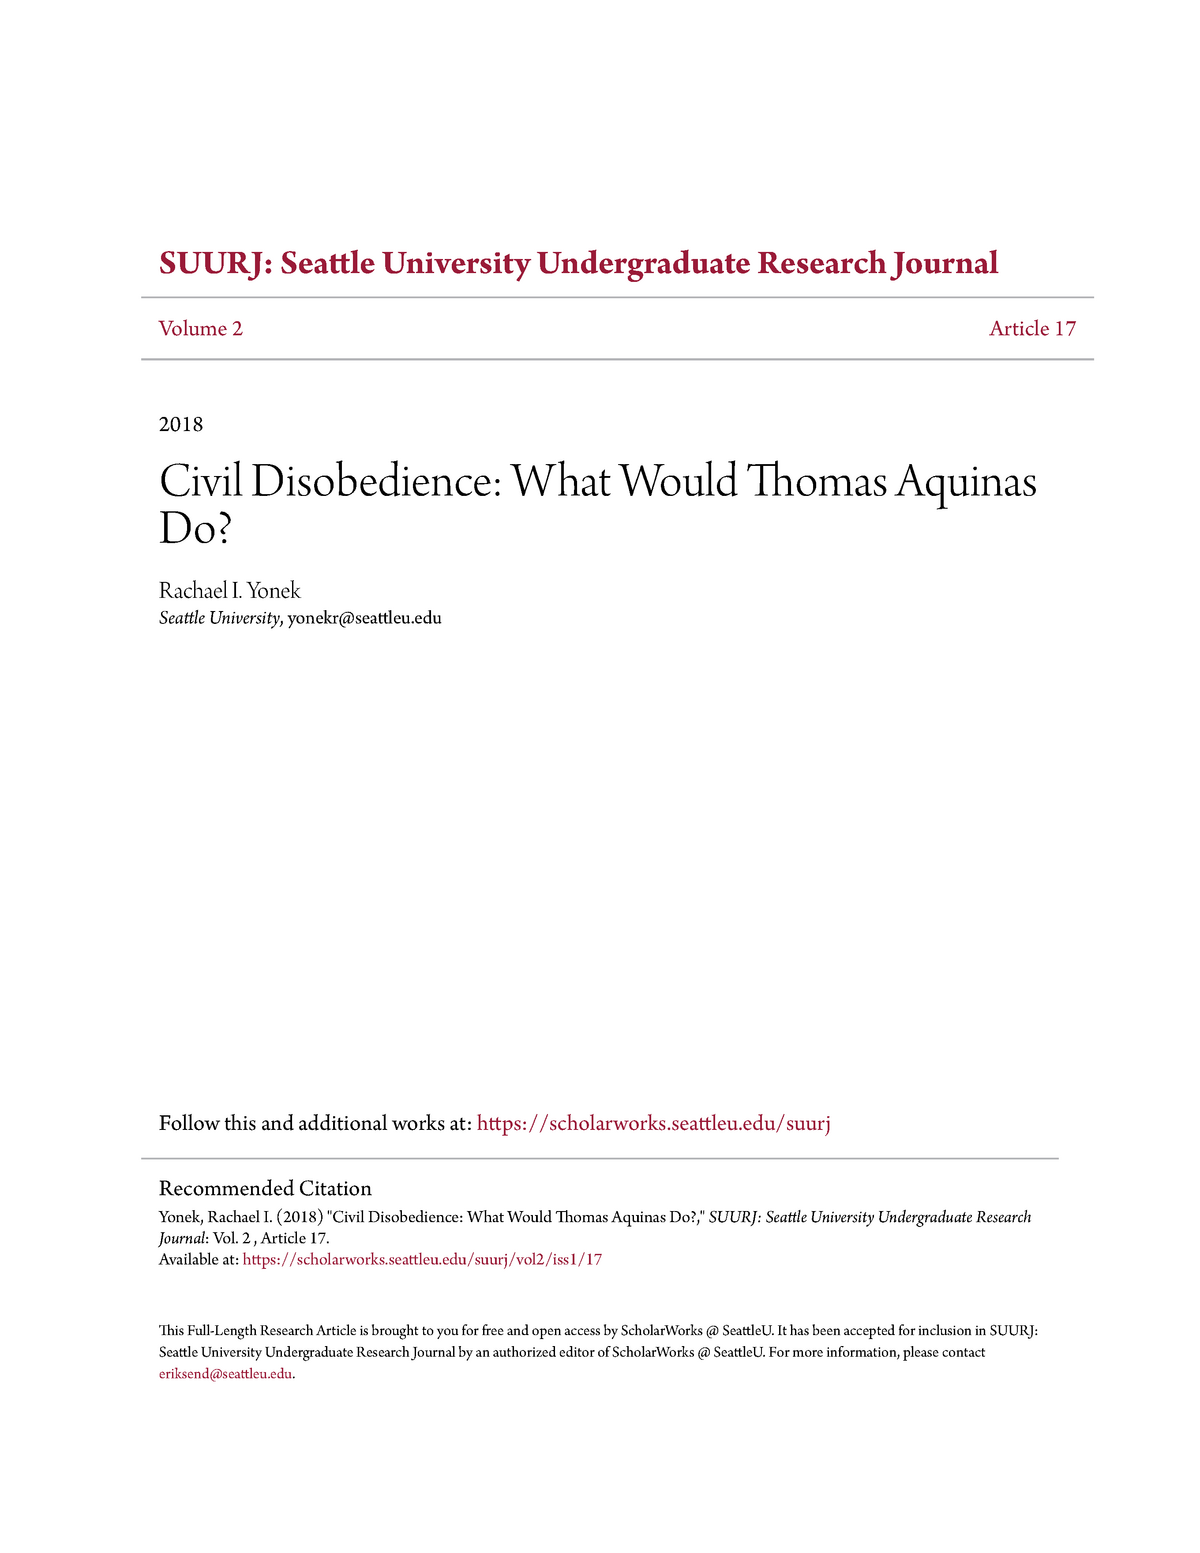 civil disobedience research paper